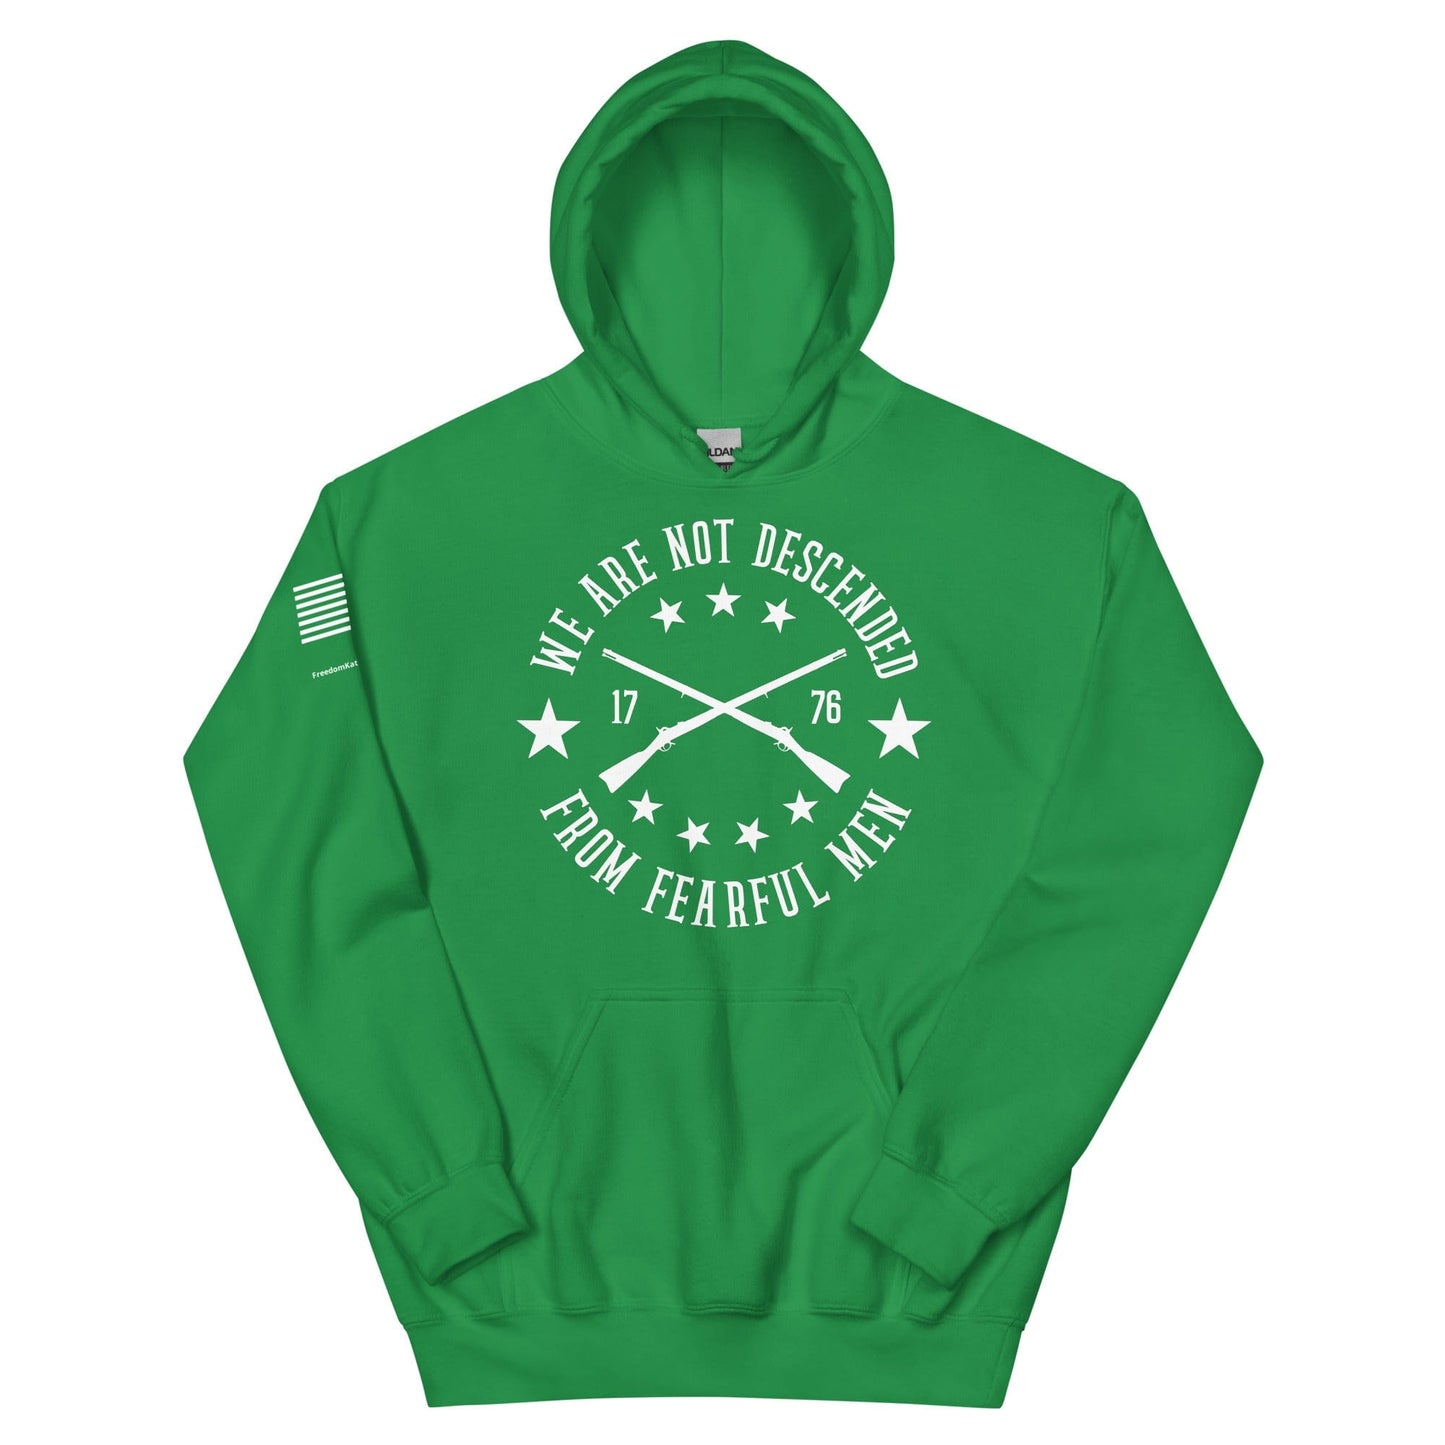 FreedomKat Designs Hoodie Irish Green / S We Are Not Descended From Fearful Men Hoodie